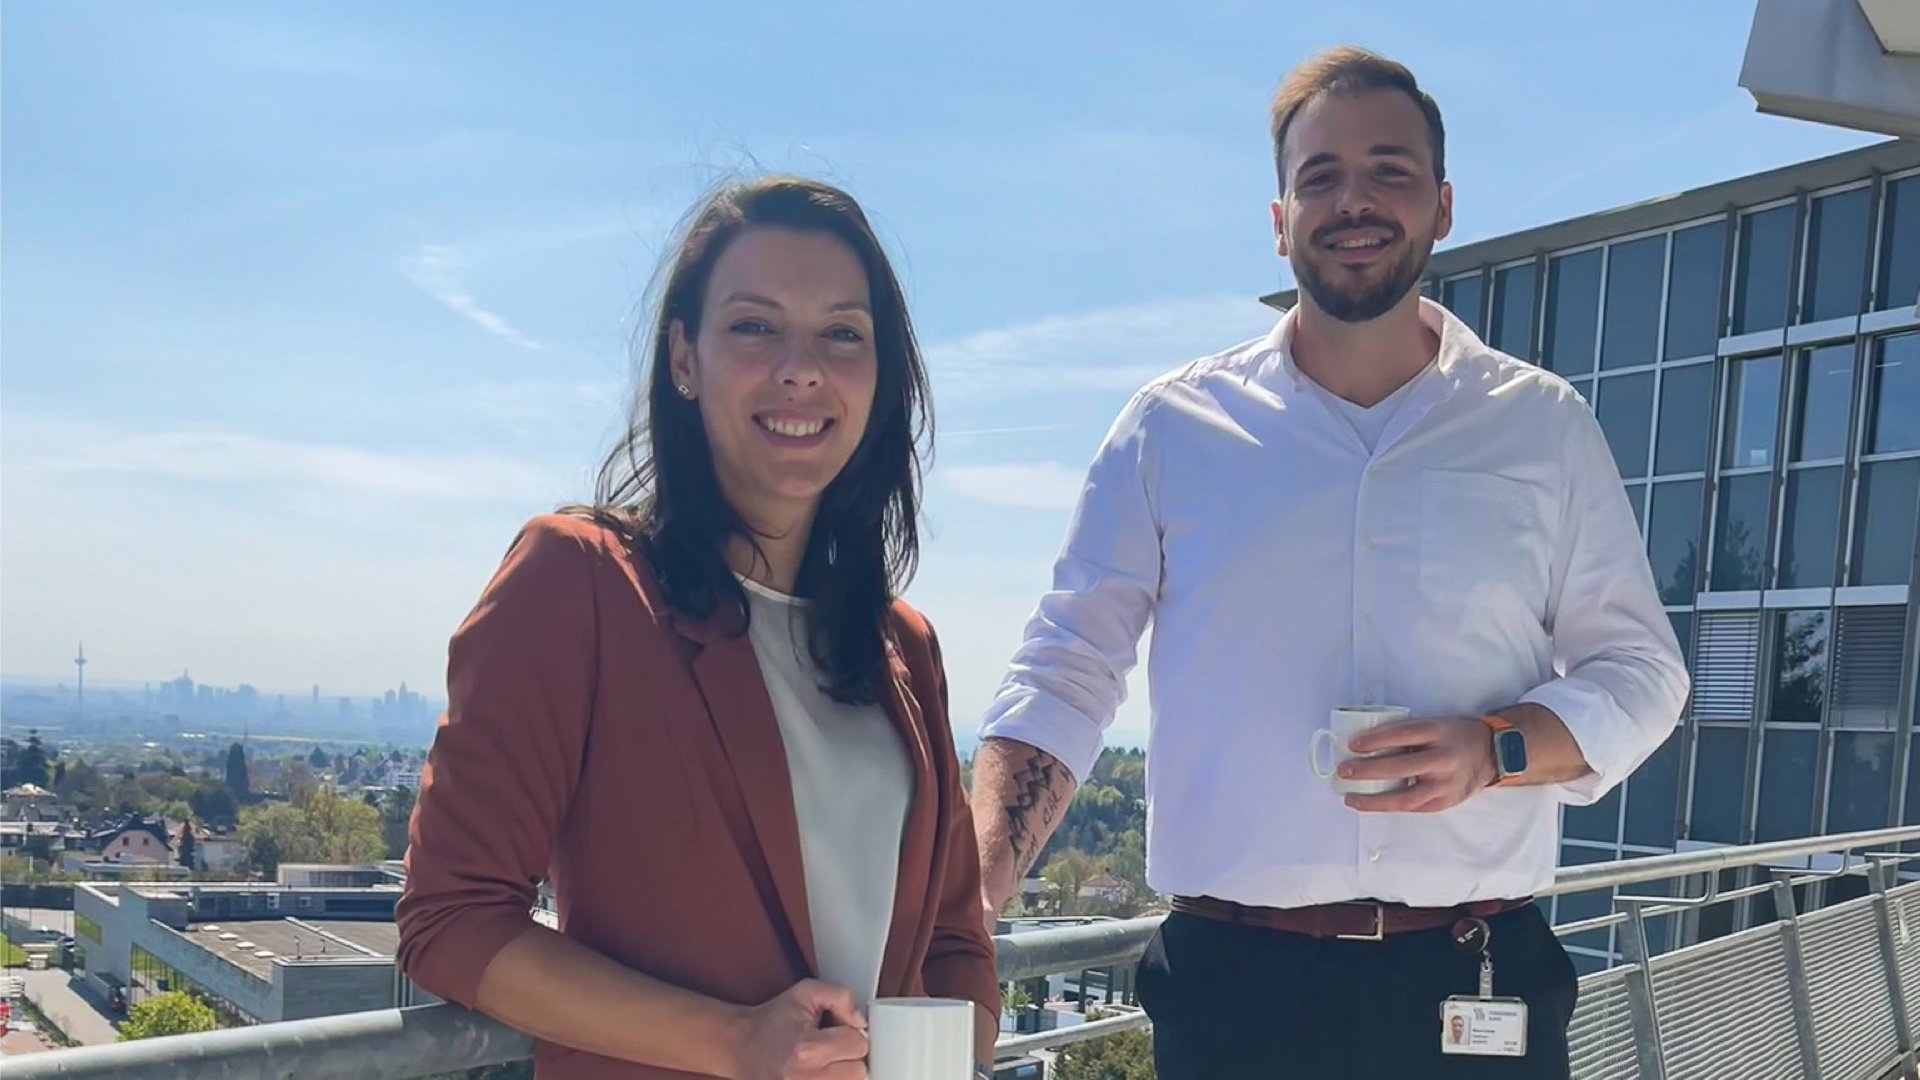 Get to know Simone Neppach and Maximilian Dettner from Fresenius Kabi’s EHS team